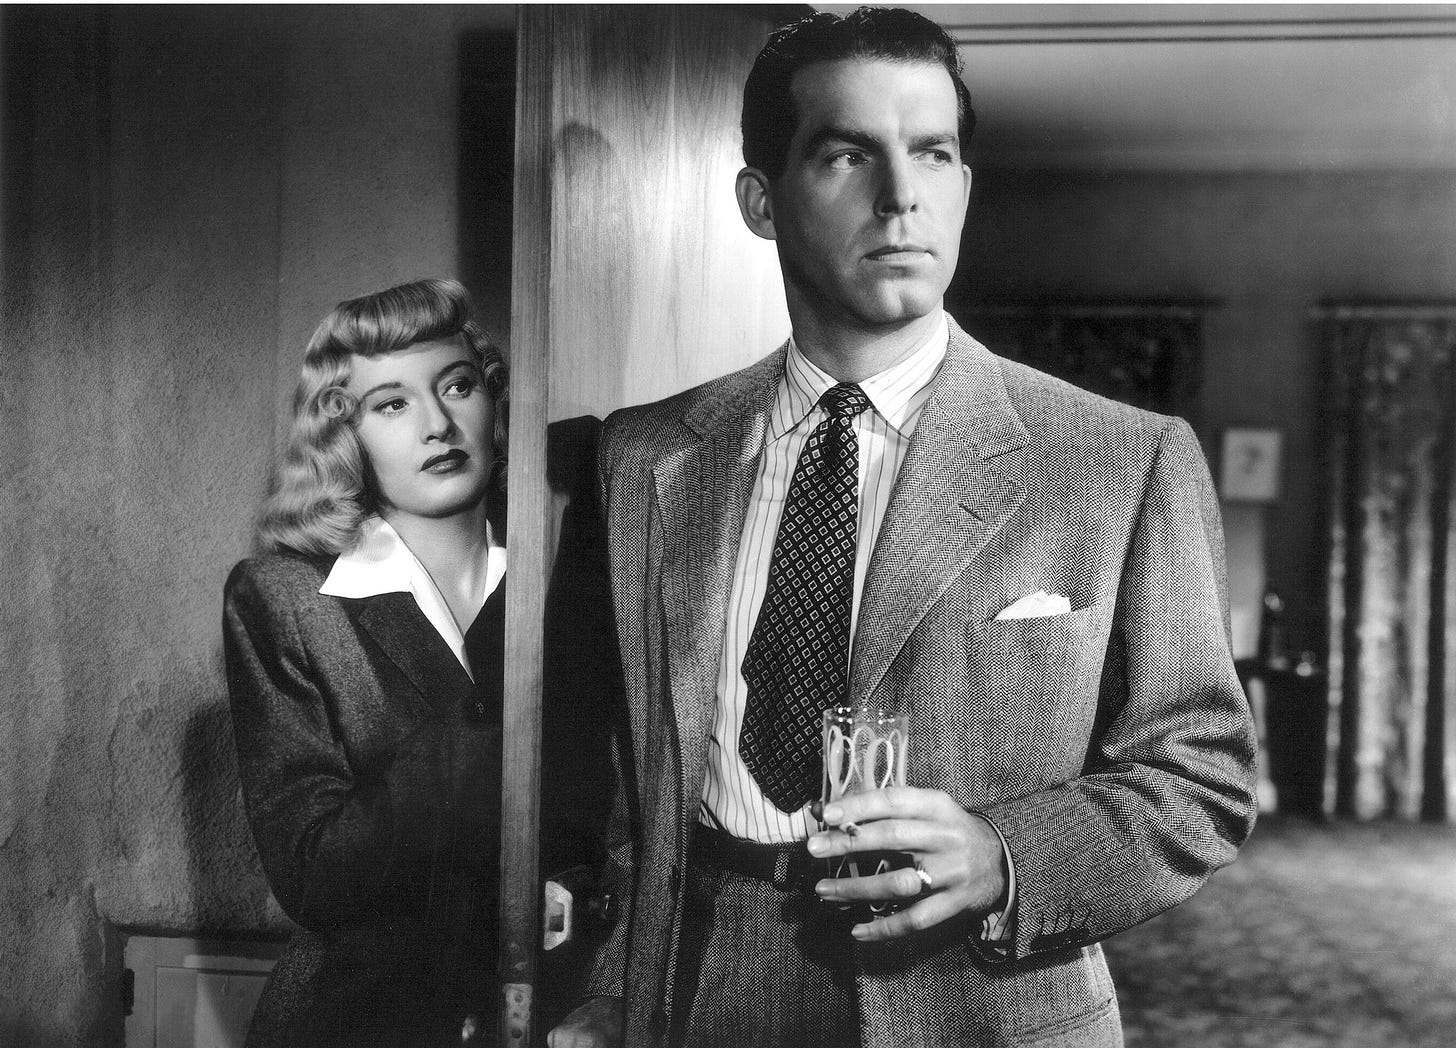 A man enters a room with a drink and a cigarette in his hand, unaware of the woman hiding behind the door